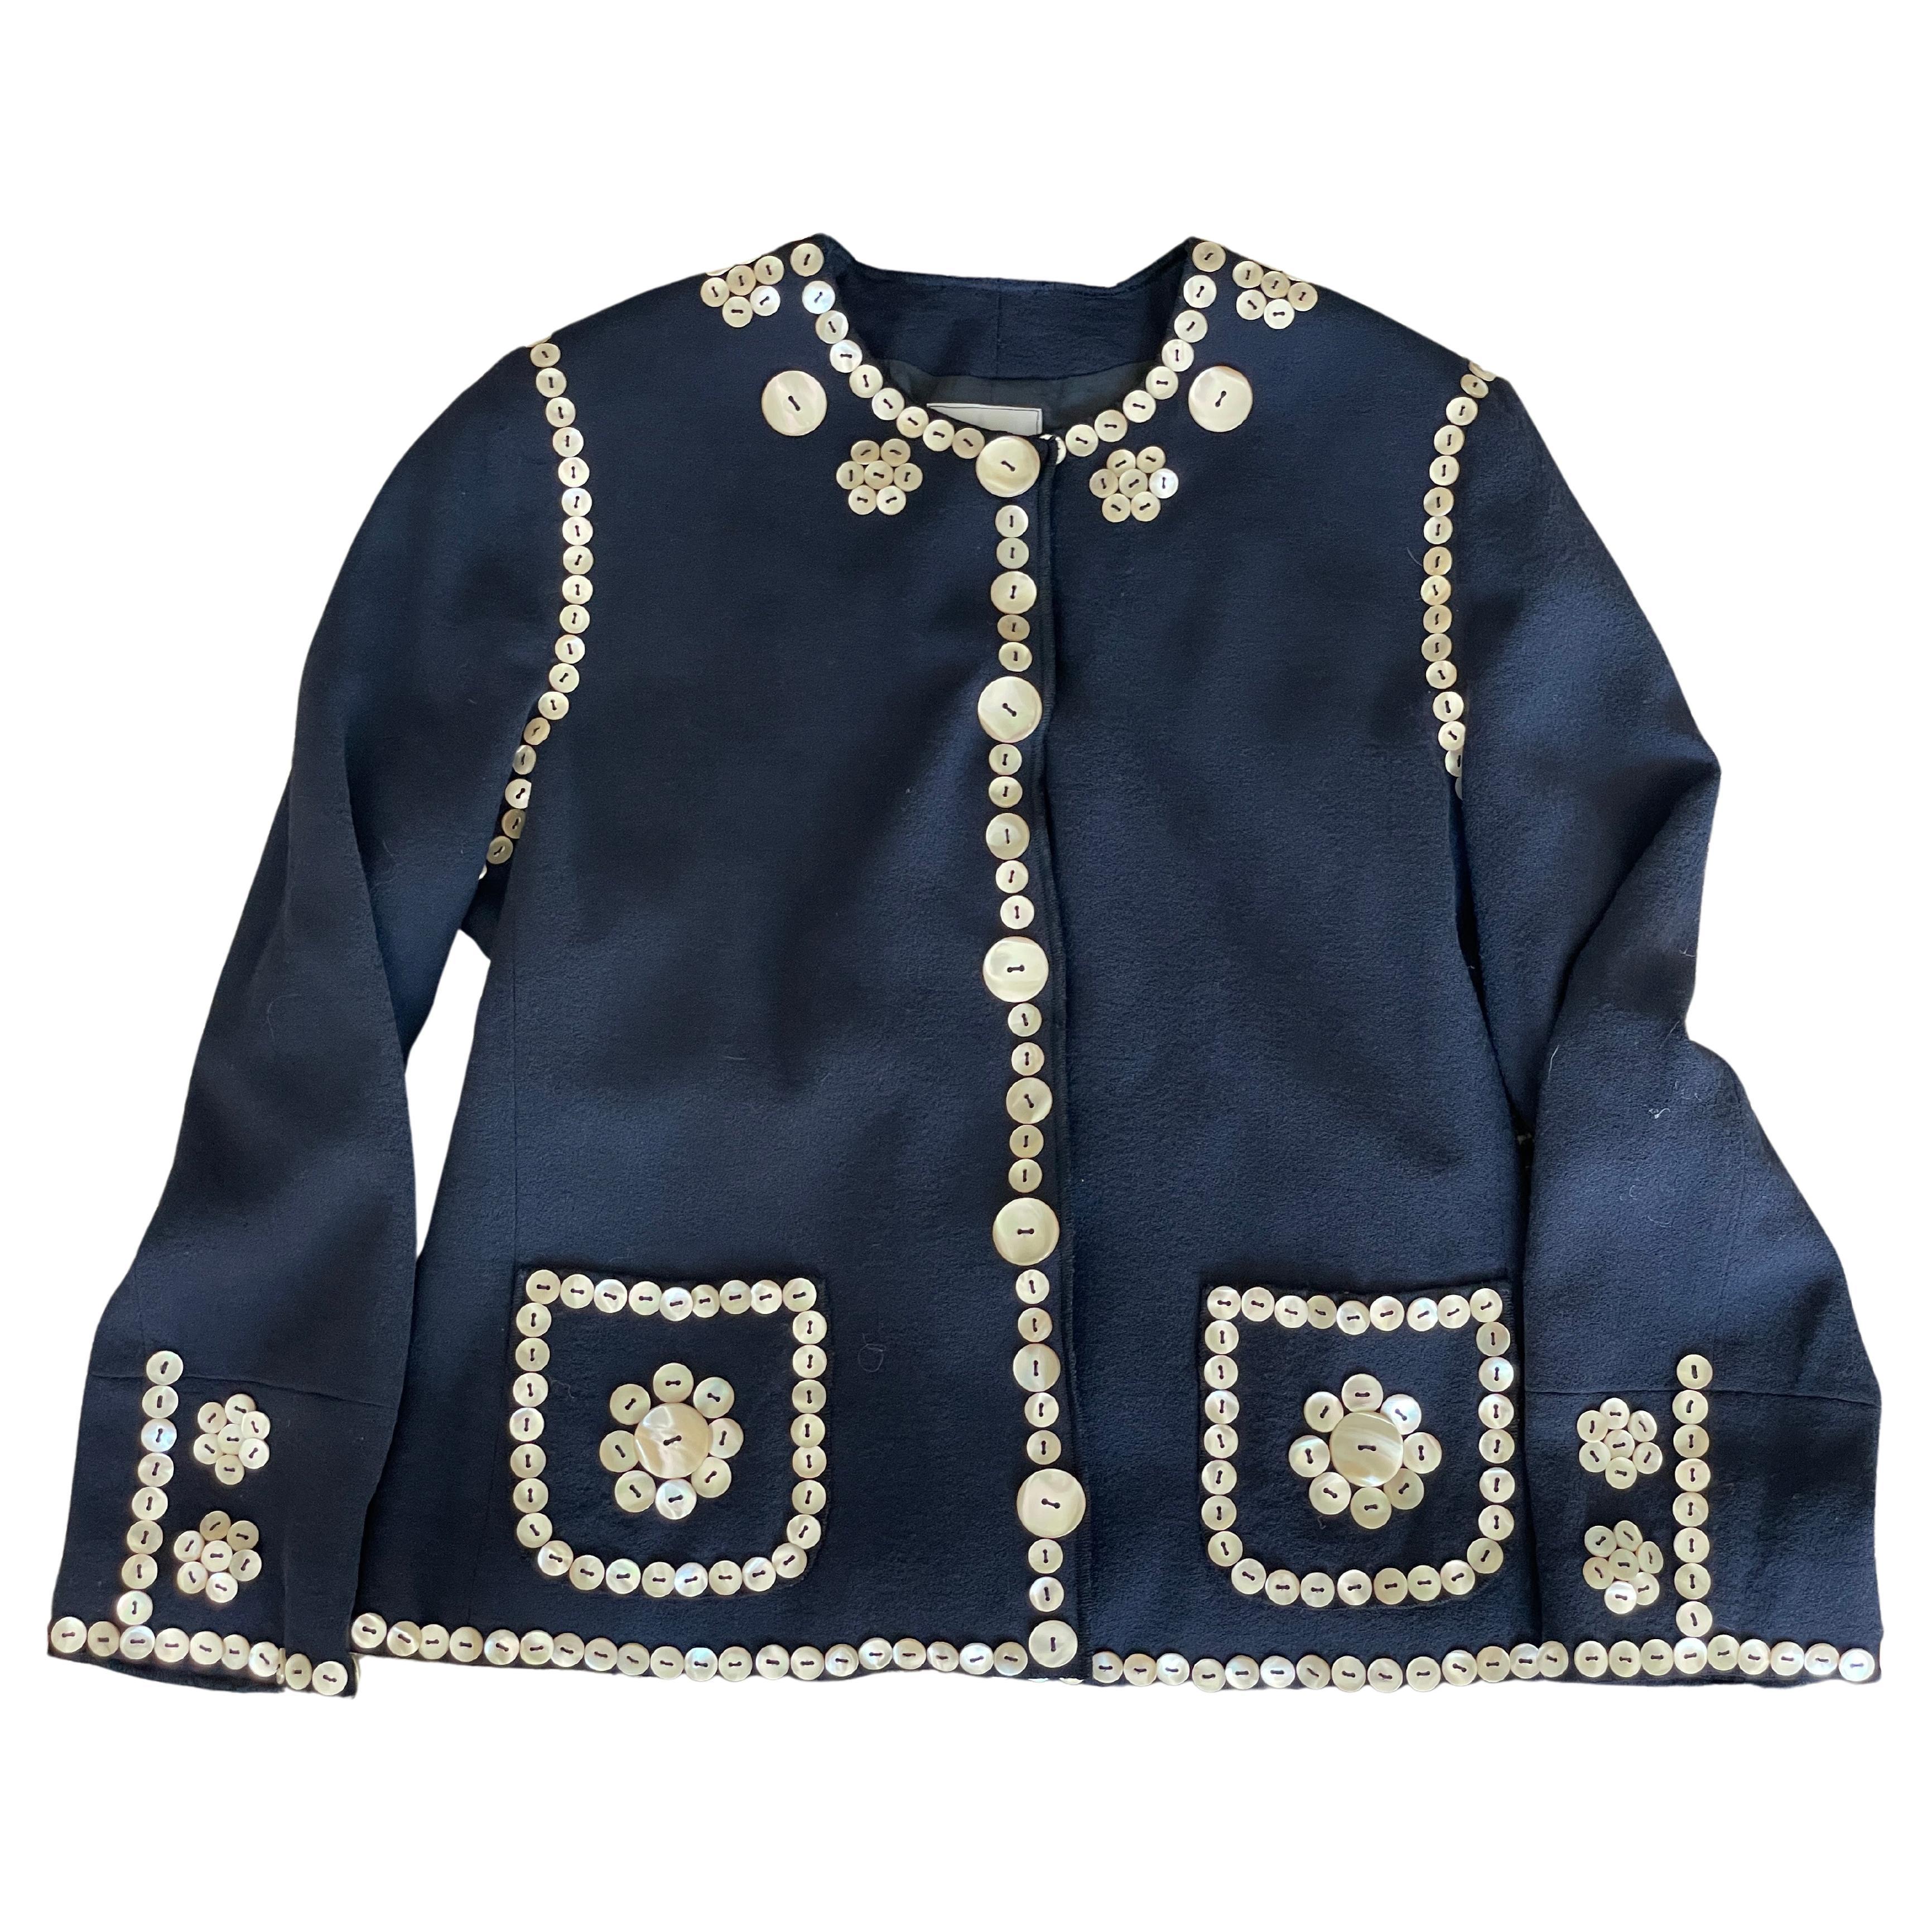 Moschino Cheap & Chic Vintage "Pearly Queen" Pearl Button Embellished Jacket For Sale